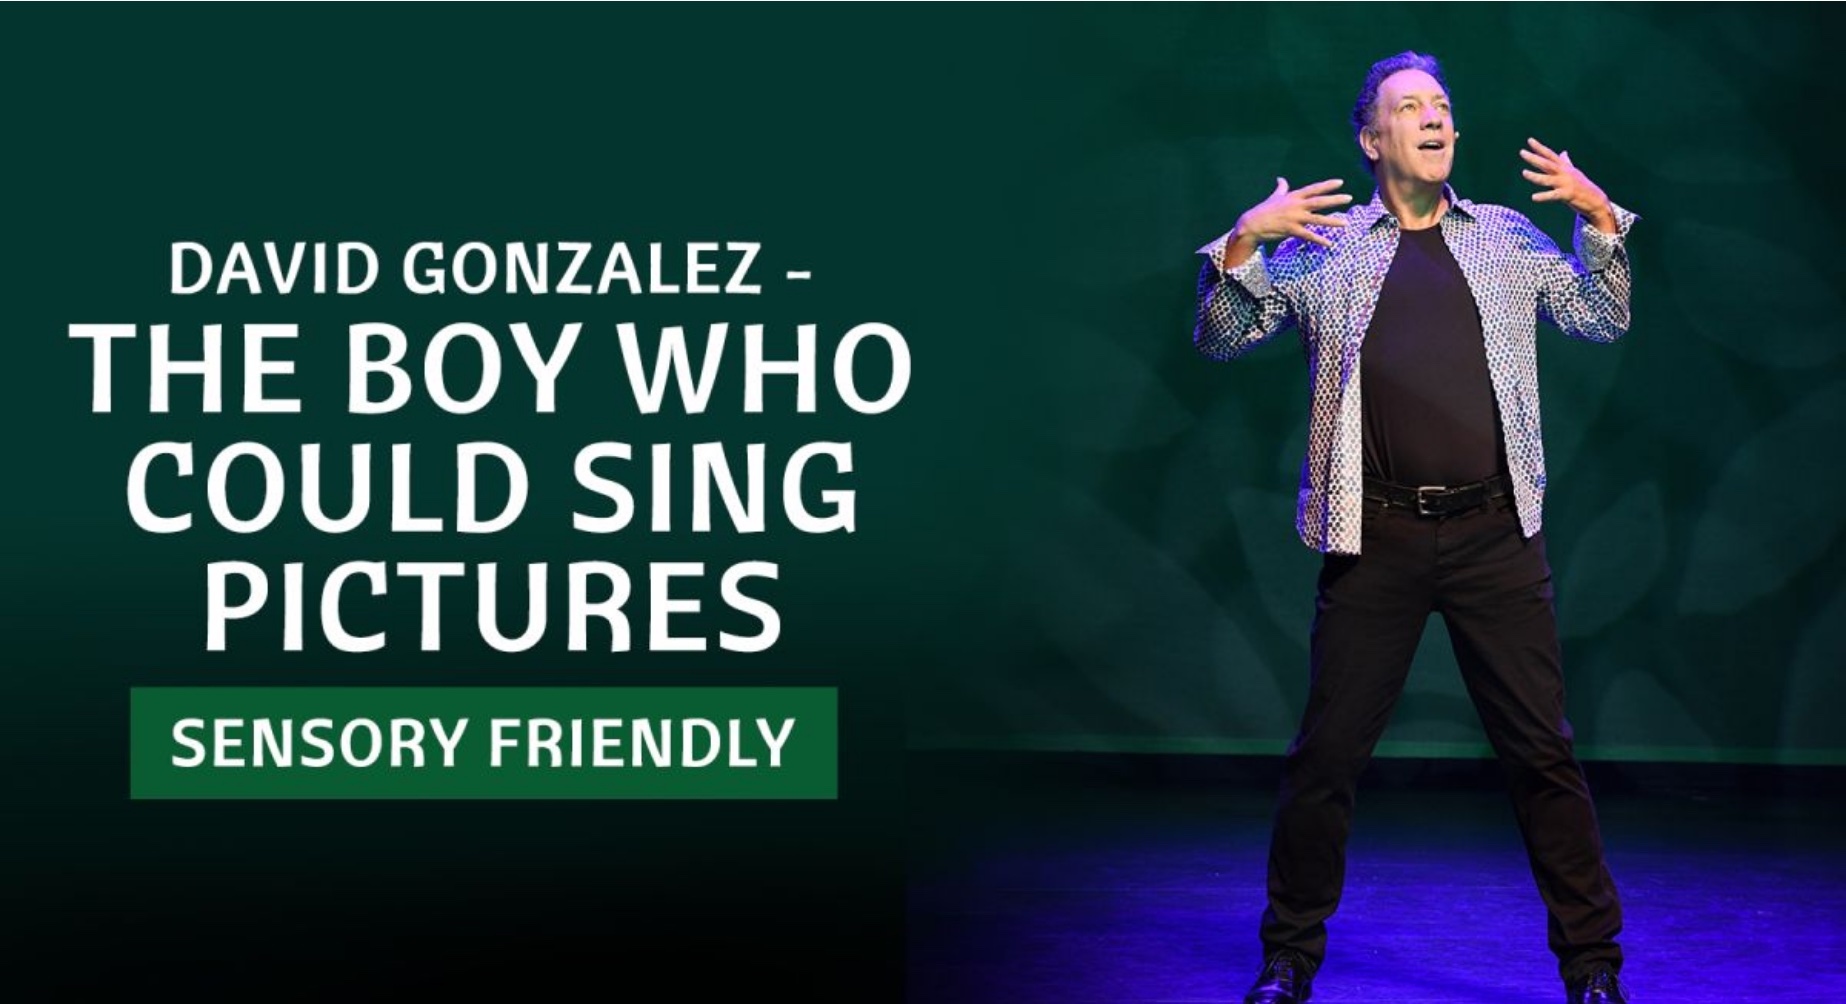 David Gonzalez: The Boy Who Could Sing Pictures - Sensory-Friendly Performance at HEB Performance Hall